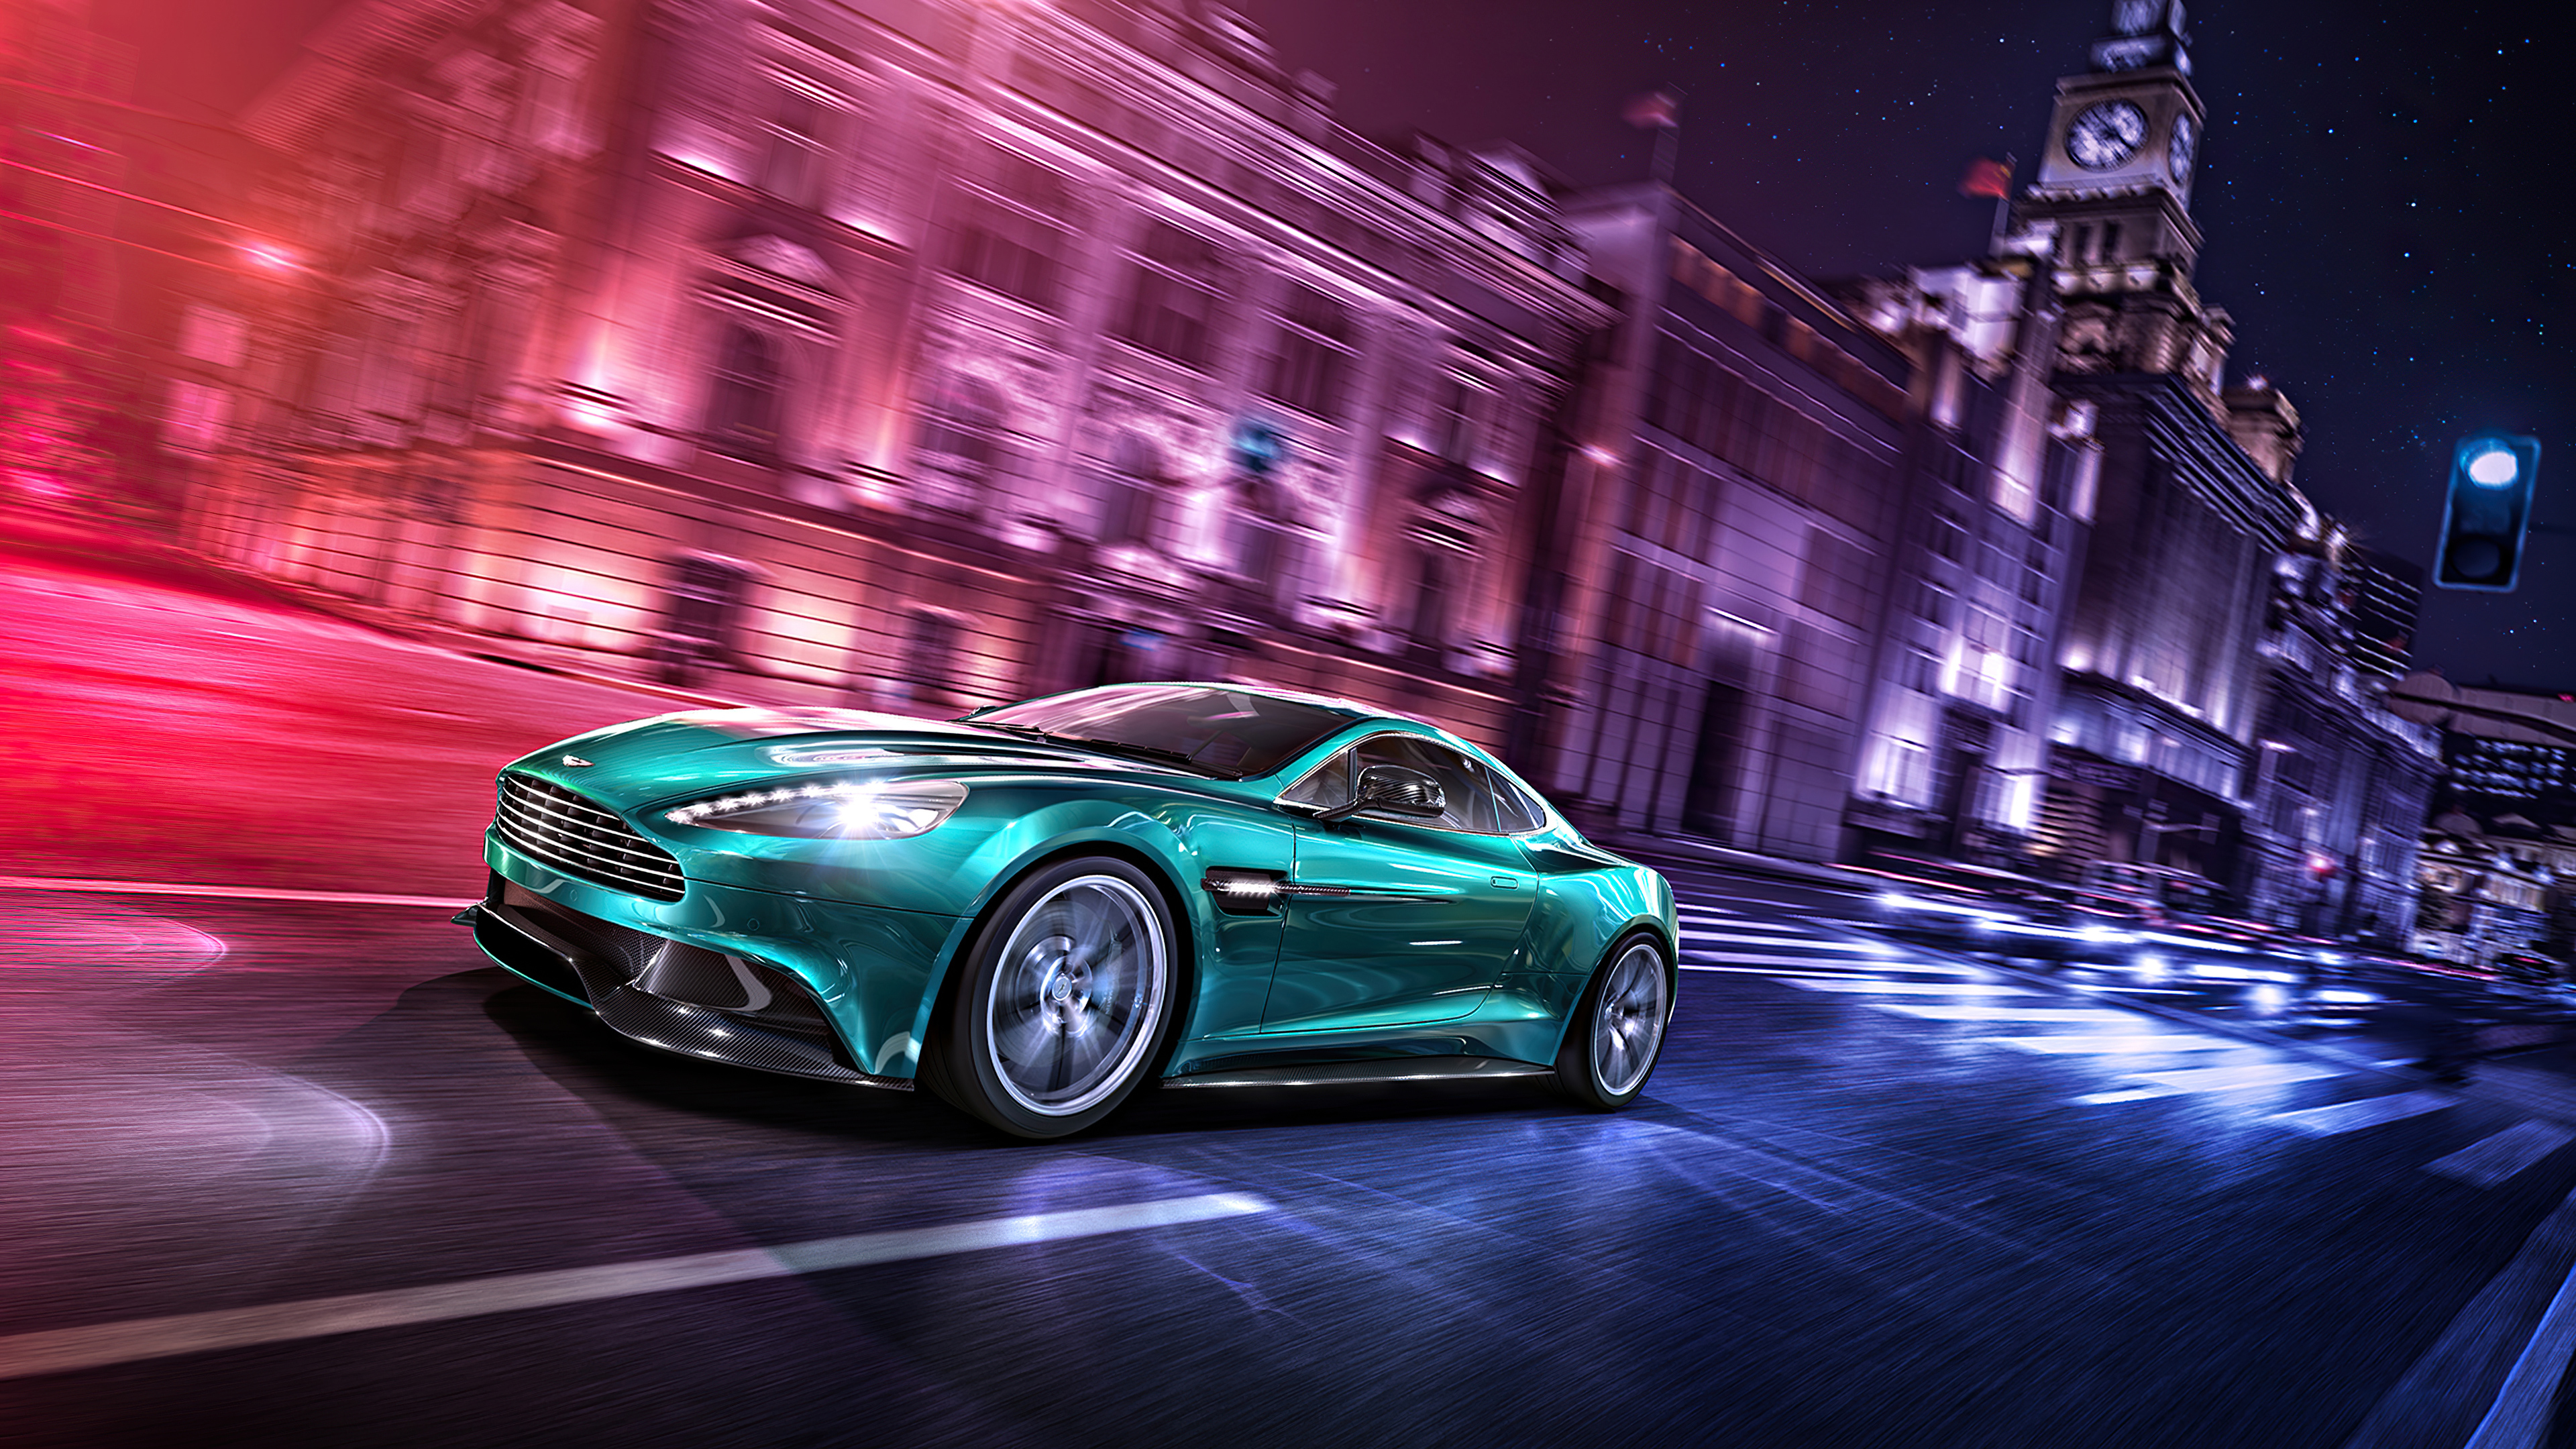 A rendering of a picture of an Aston Martin Vanquish on a city night scene